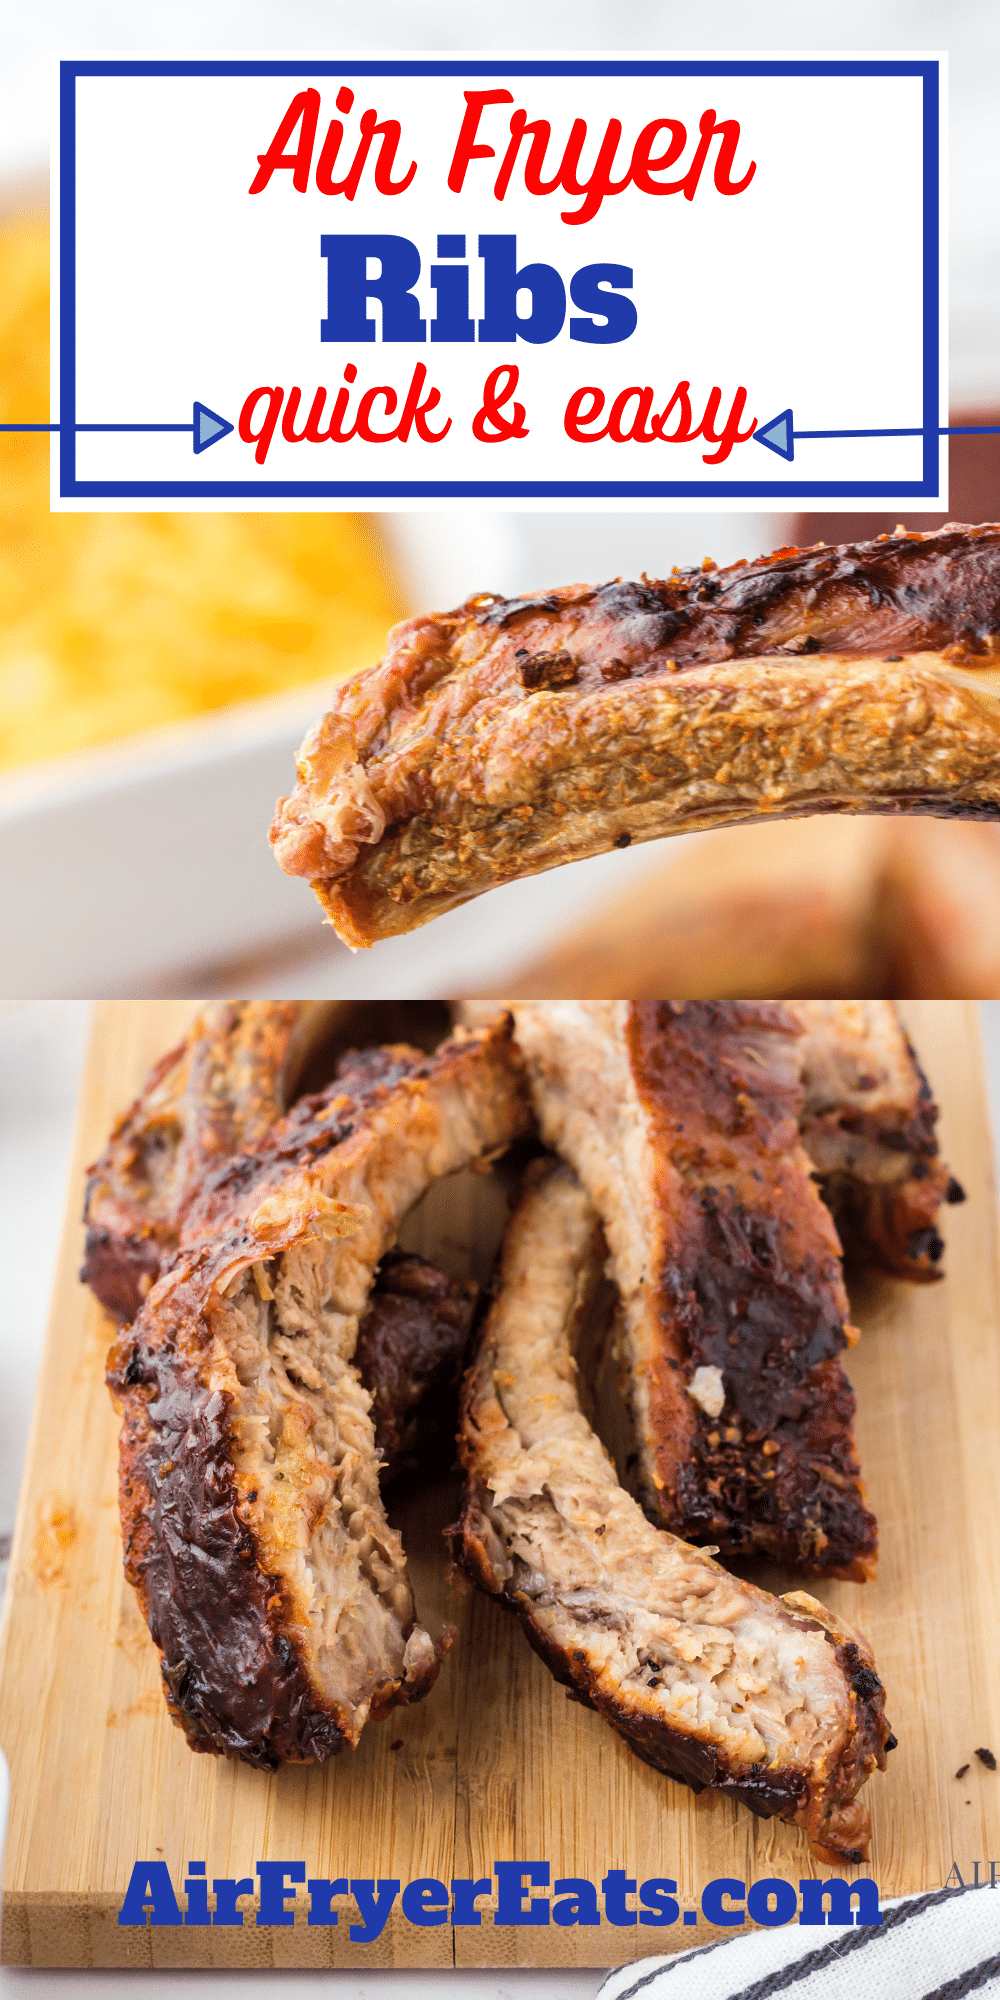 Classic BBQ from the Ninja Foodi! These Ninja Foodi Ribs are perfectly cooked, tender, juicy, and expertly seasoned with both a dry rub and your favorite BBQ sauce. #ribs #bbq via @vegetarianmamma